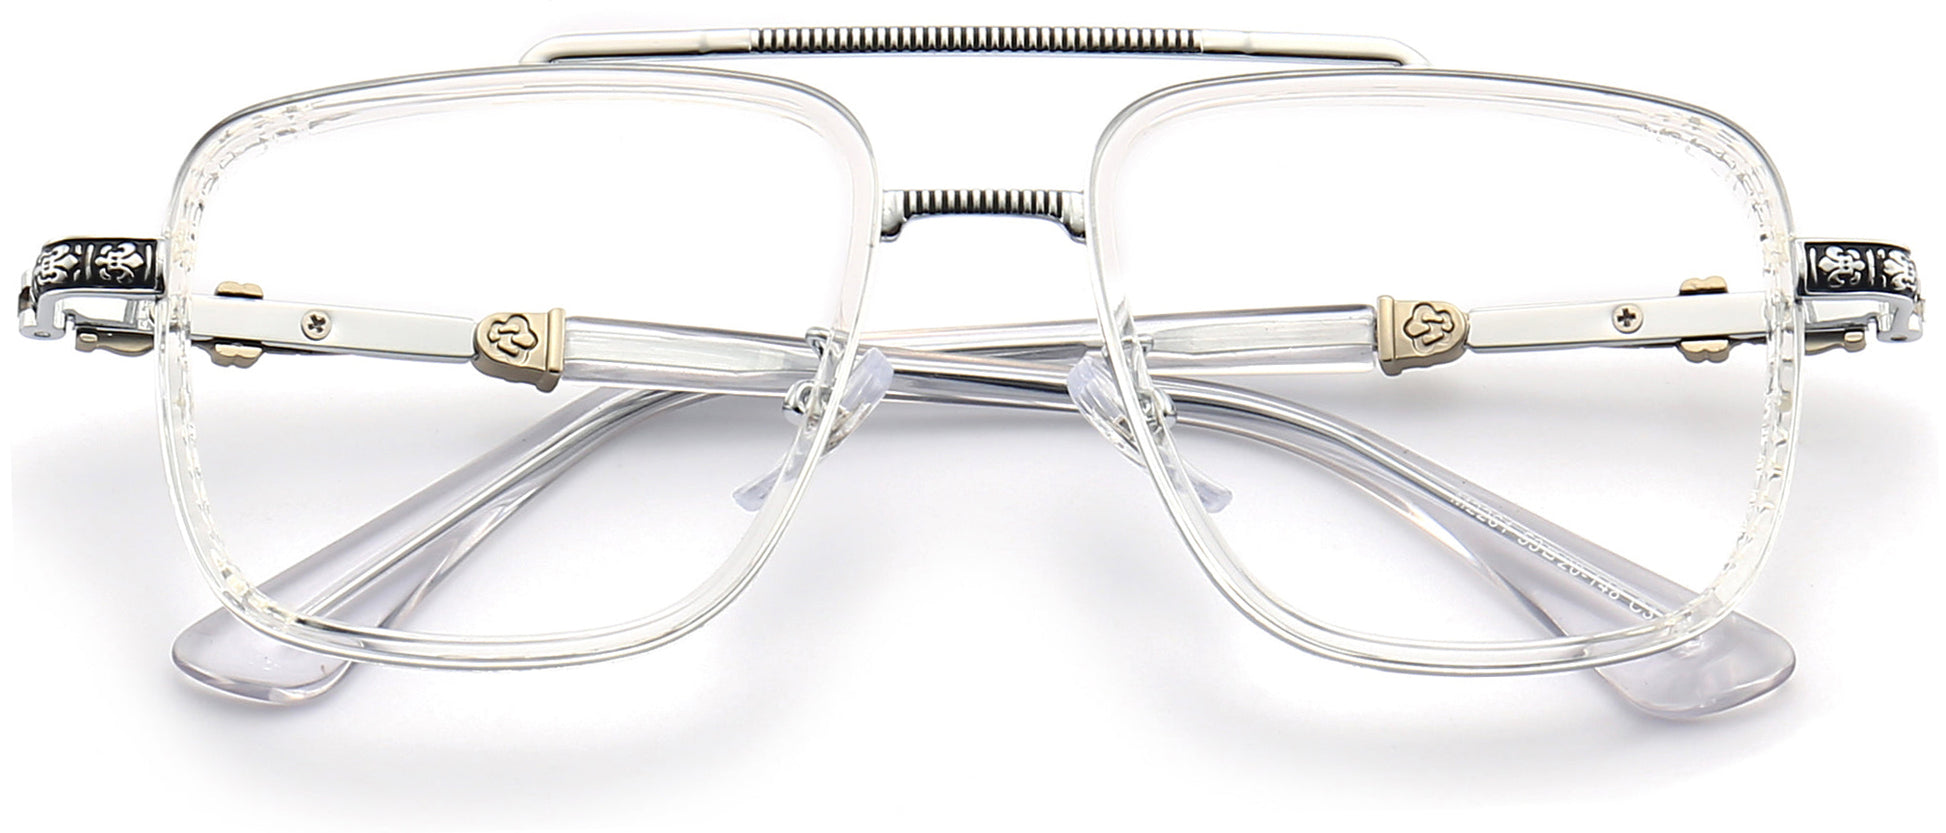 Roberto Square Clear Eyeglasses from ANRRI, closed view